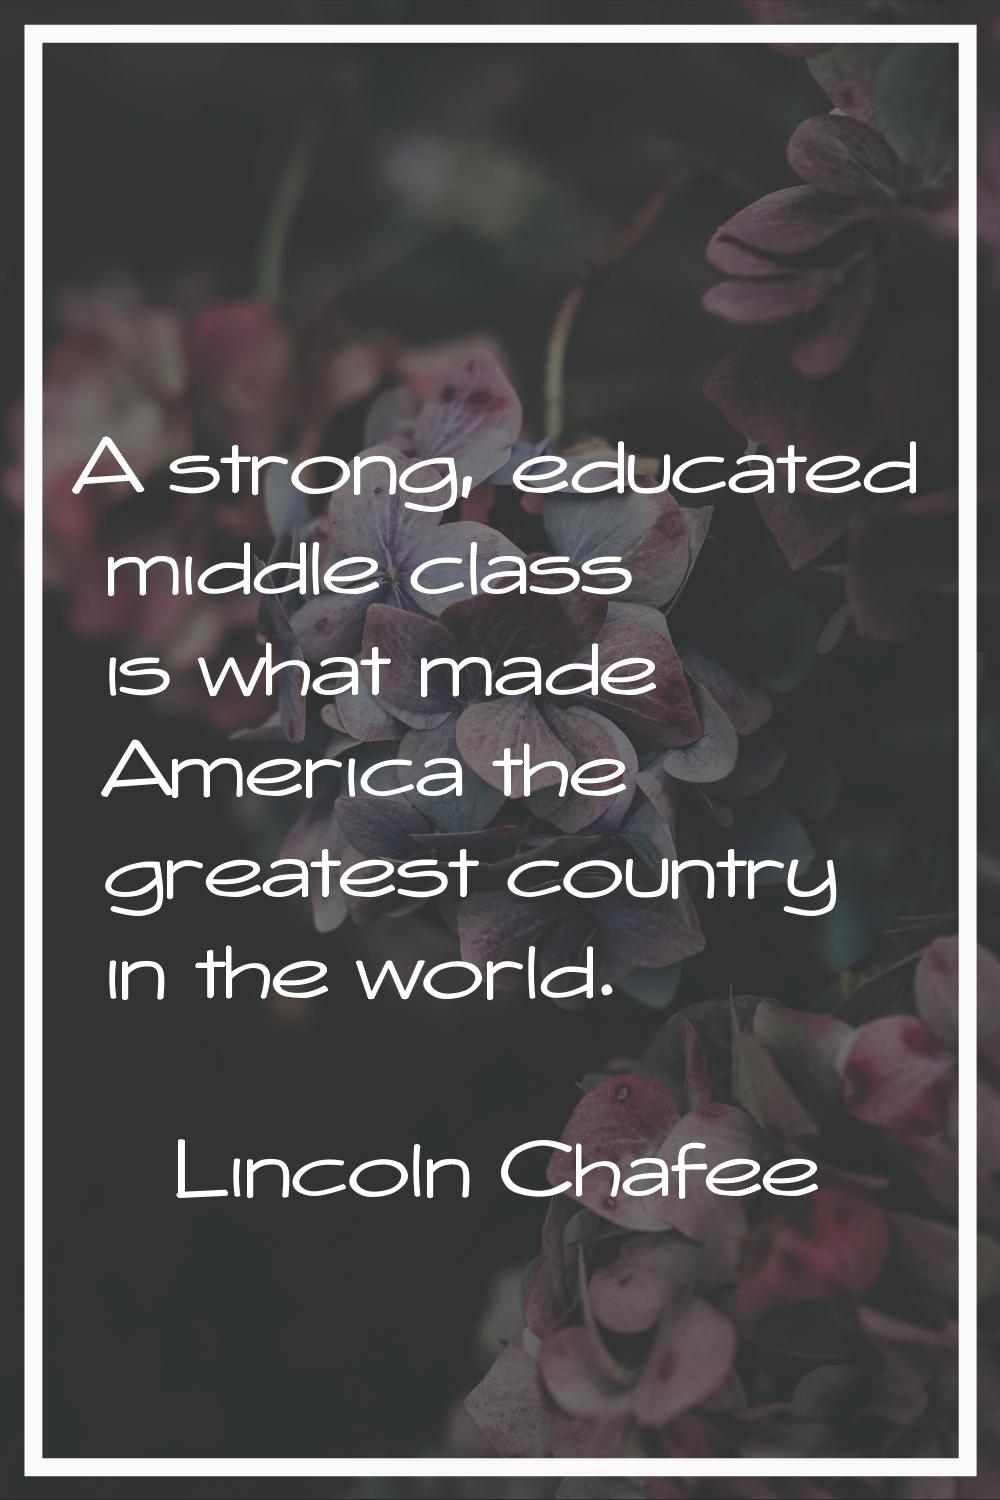 A strong, educated middle class is what made America the greatest country in the world.